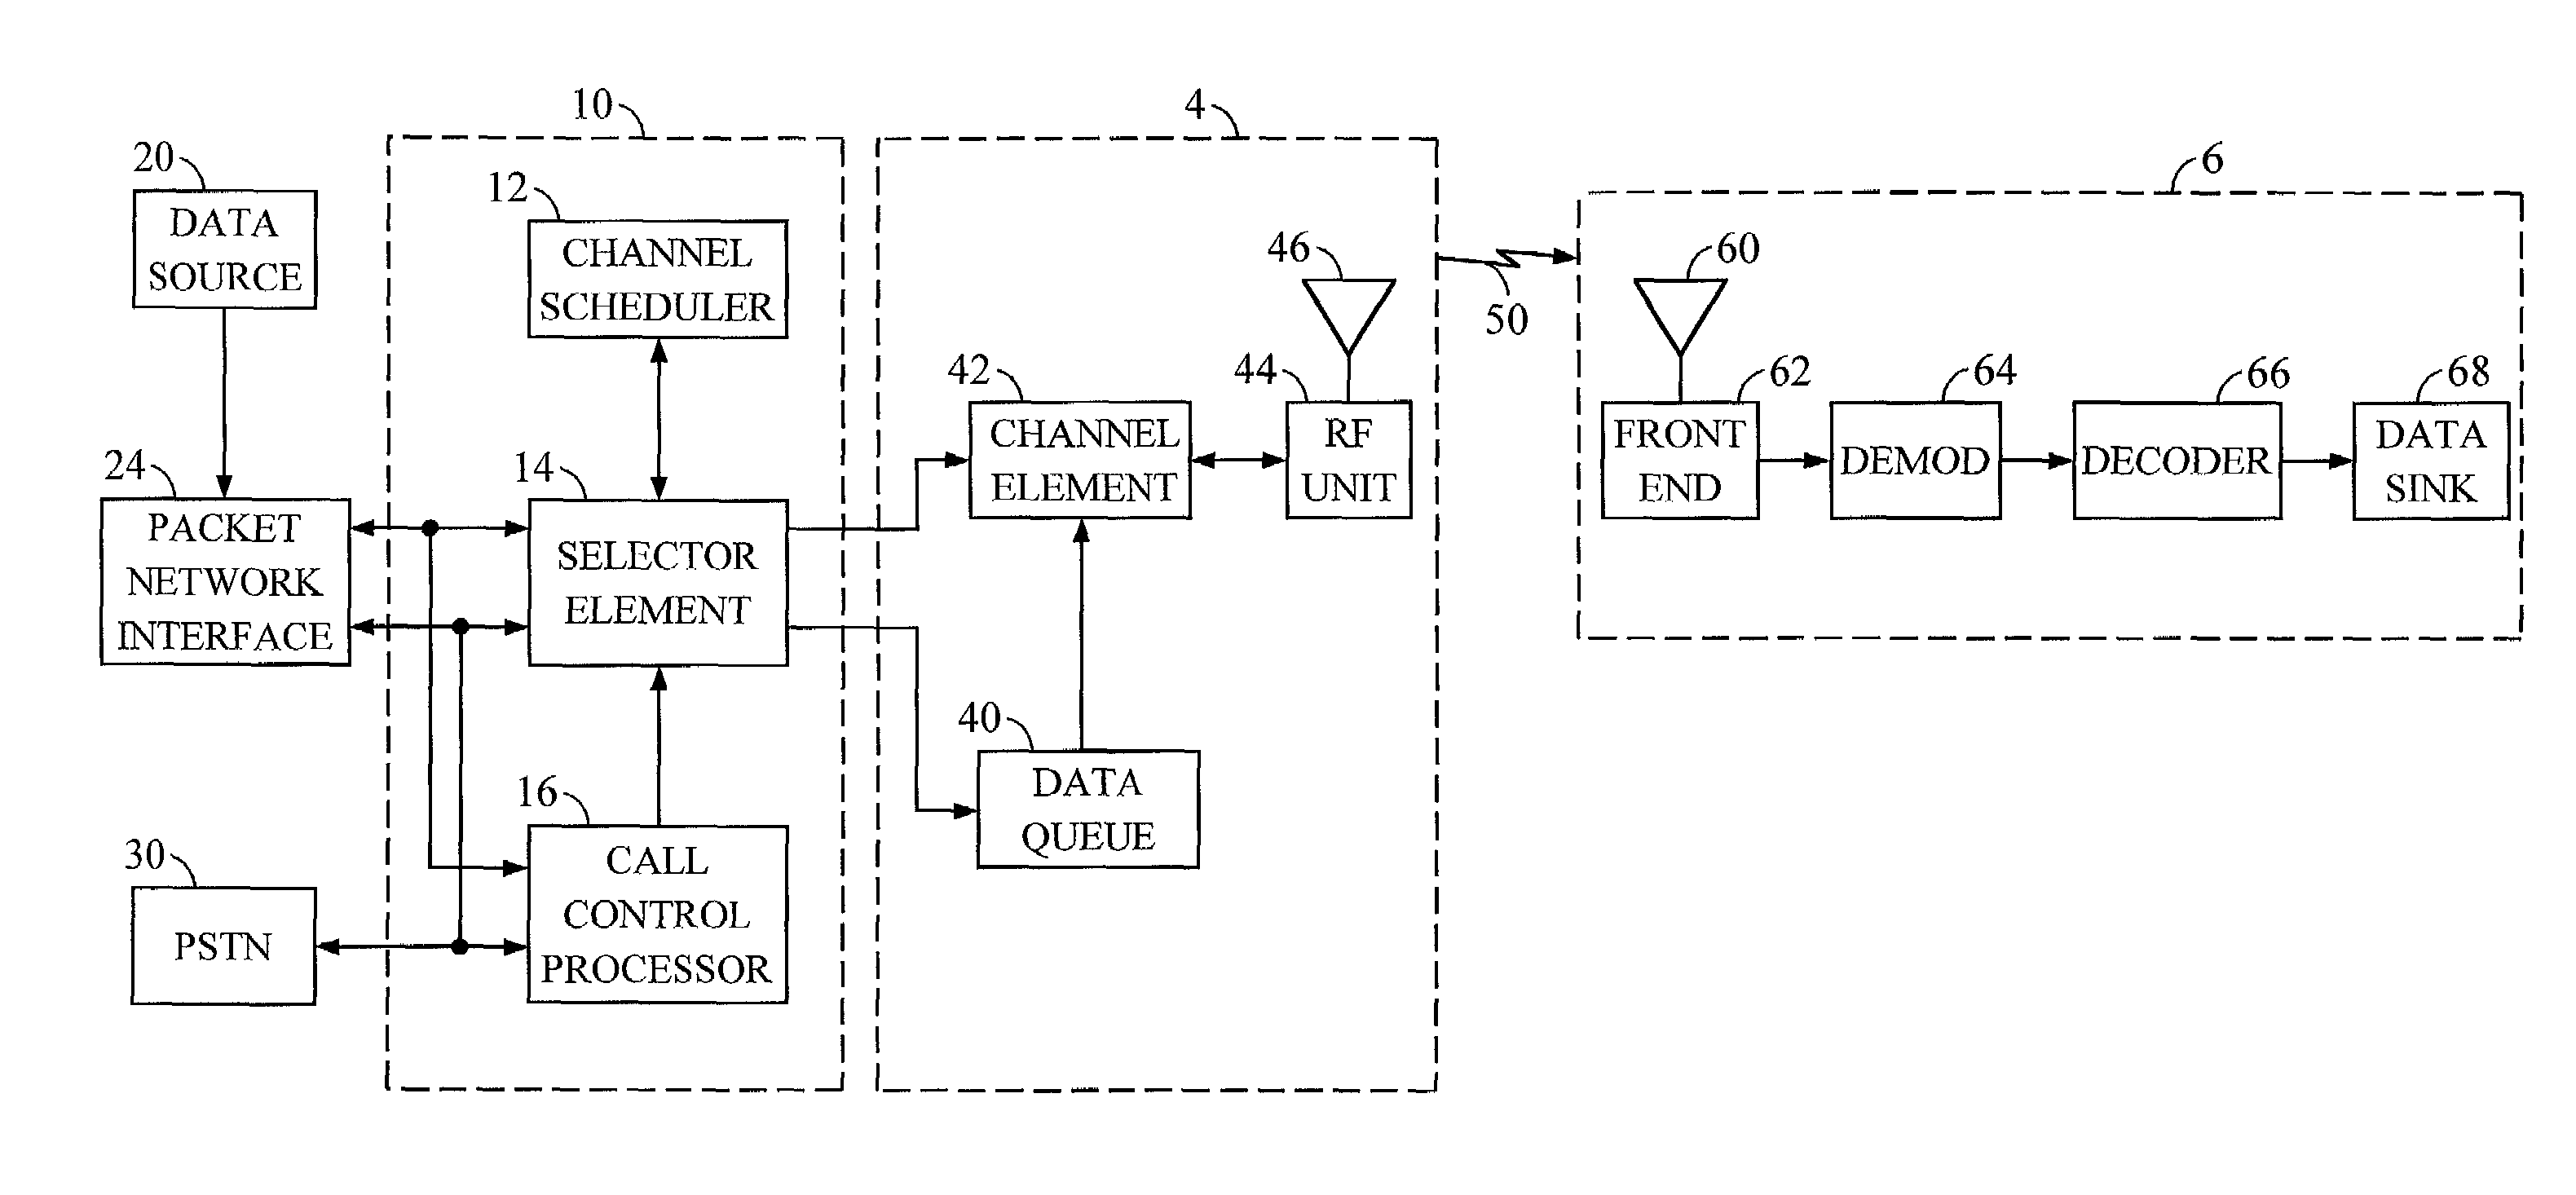 System for allocating resources in a communication system